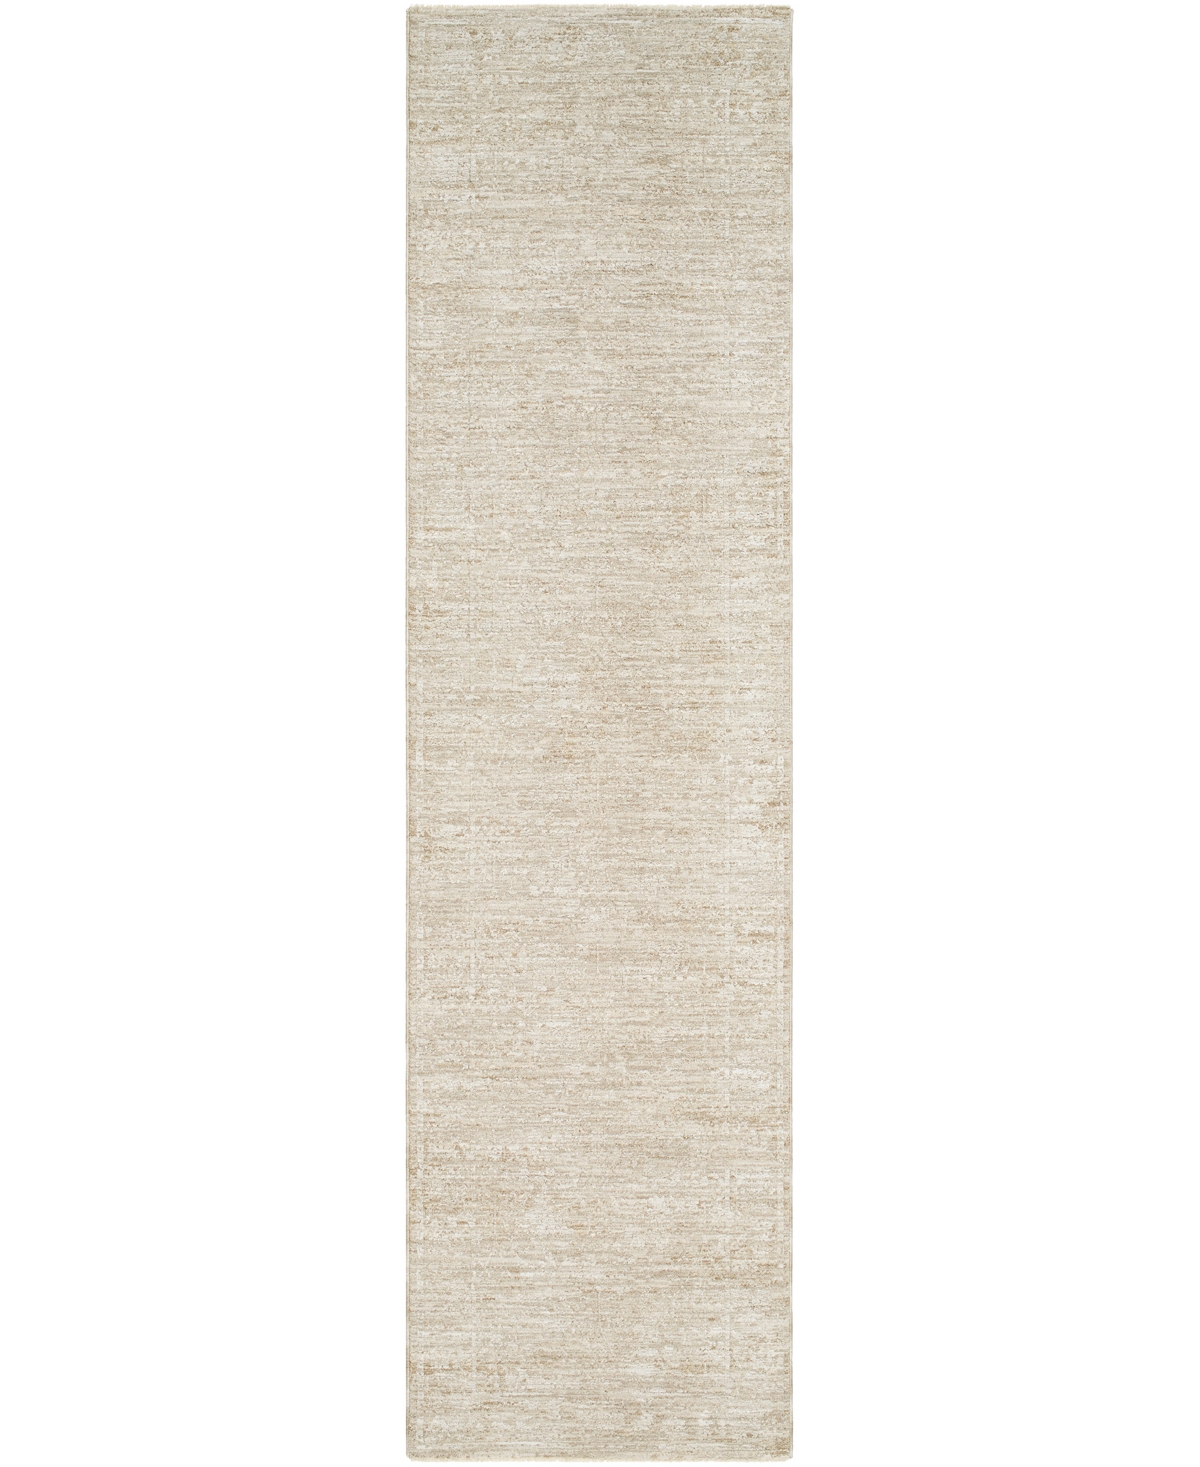 Surya Masterpiece High-low Mpc-2314 2'8" X 10' Runner Area Rug In Taupe